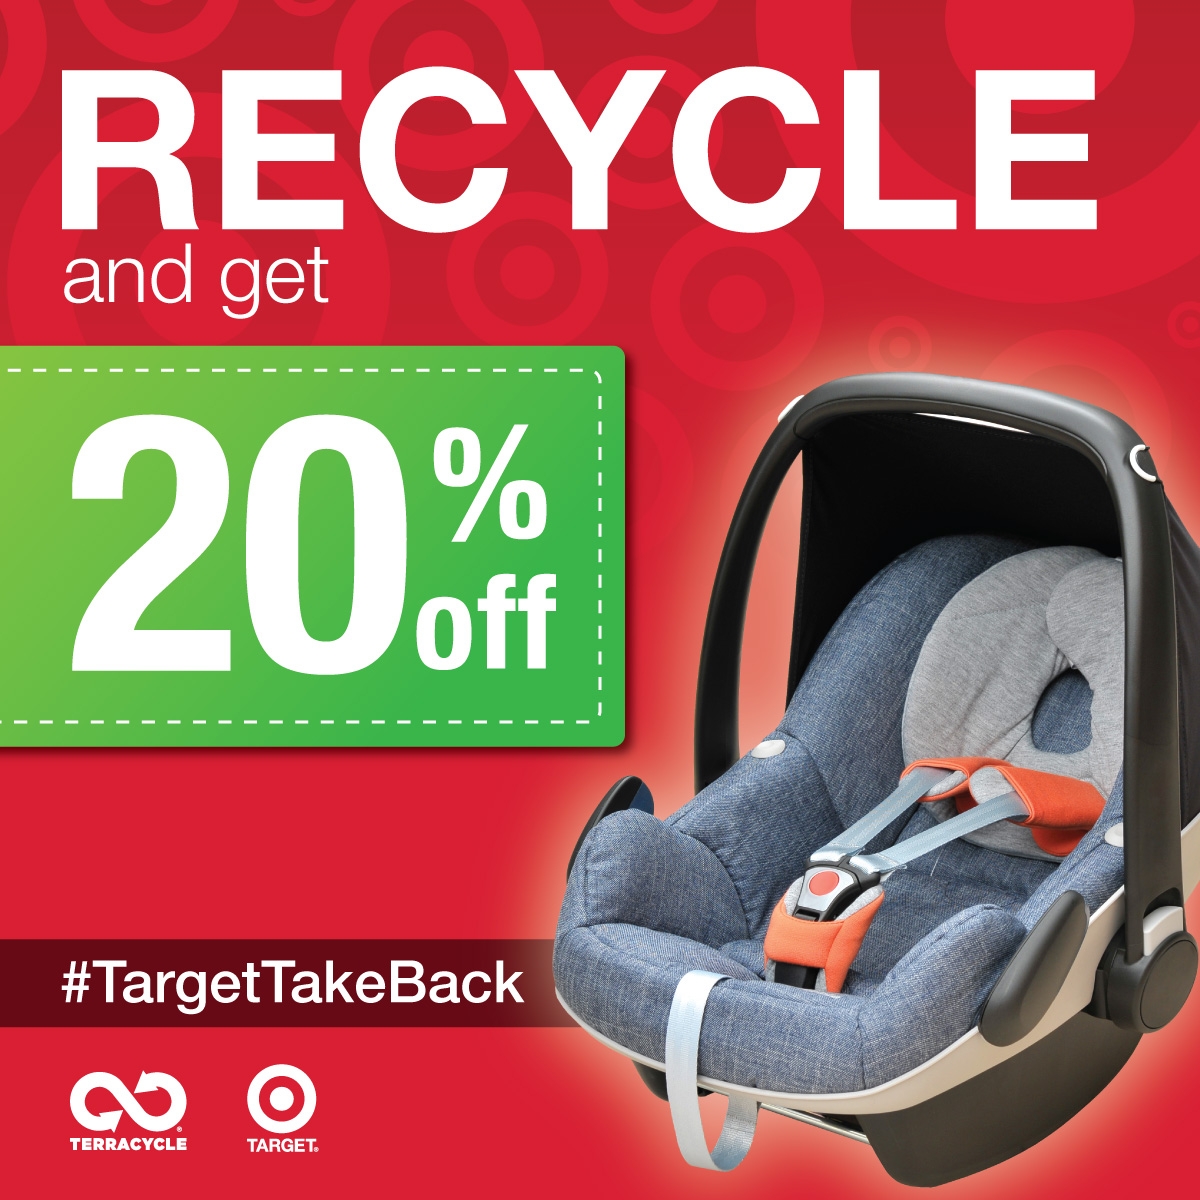 Recycle Used Car Seats at Minnesota Target Stores Central Minnesota Mom